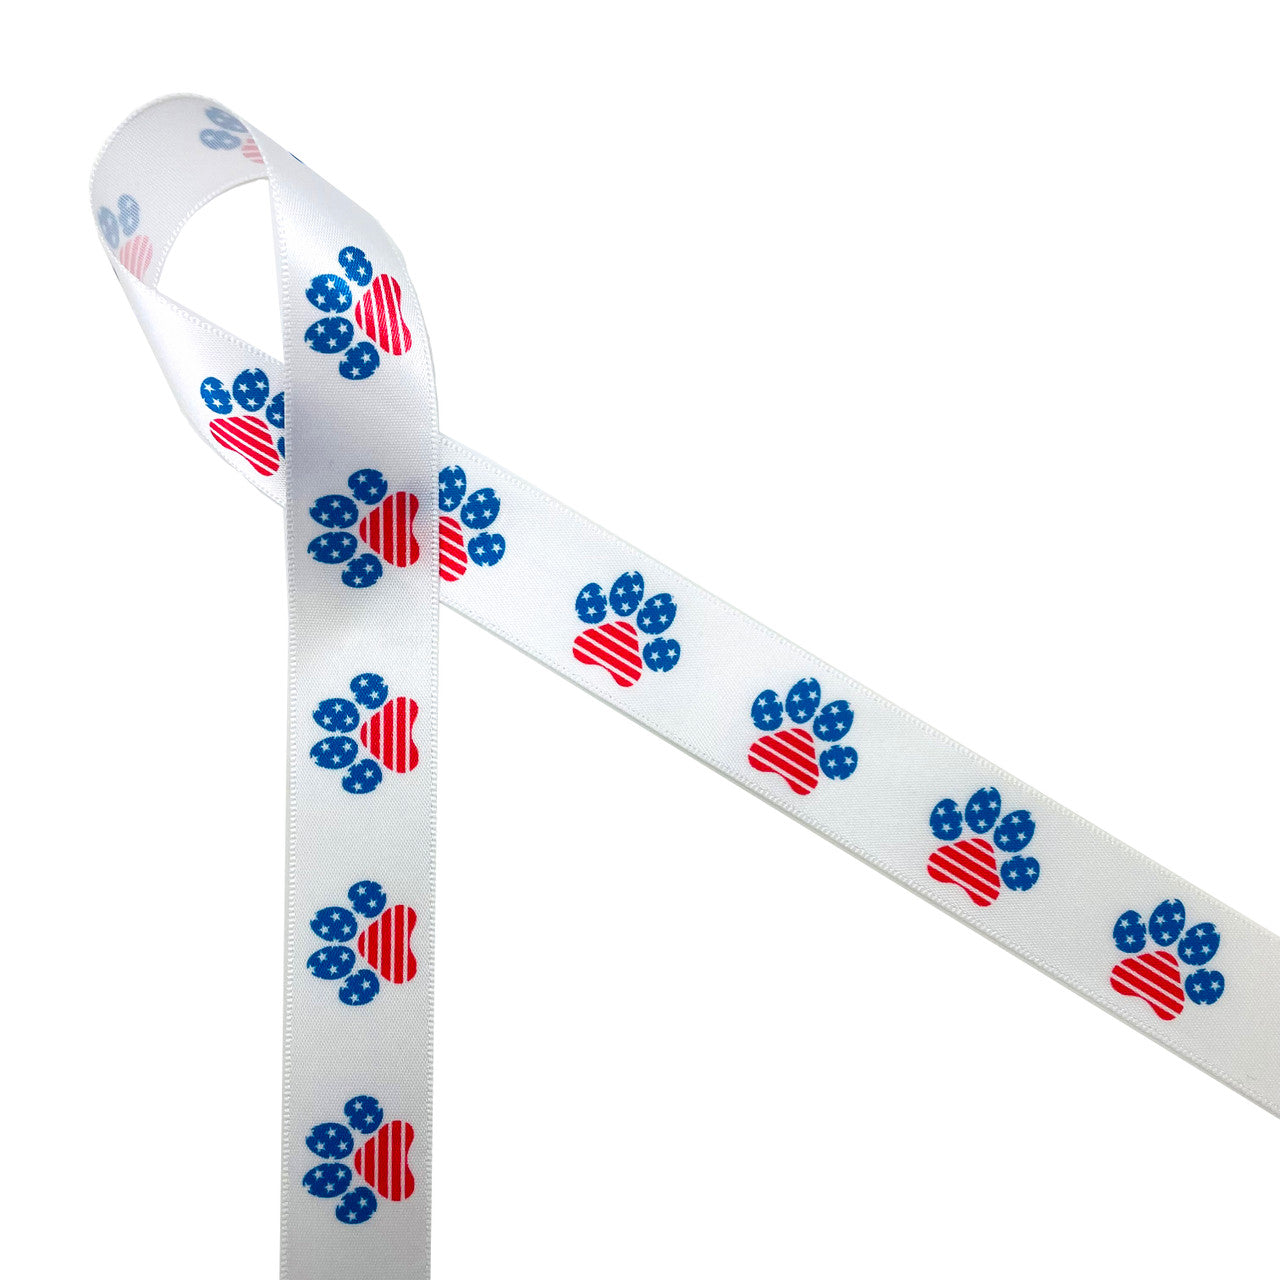 Patriotic paw prints in red, white and blue and stars and stripes printed on 7/8" white single face satin is a fun ribbon for celebrating the 4th of July with your furry friends. This is a fun ribbon for hair bows, head bands, gift wrap, gift baskets, party decor, table decor and party favors. Be sure to have this ribbon on hand for pet themed crafts, sewing and quilting projects too! All our ribbon is designed and printed in the USA